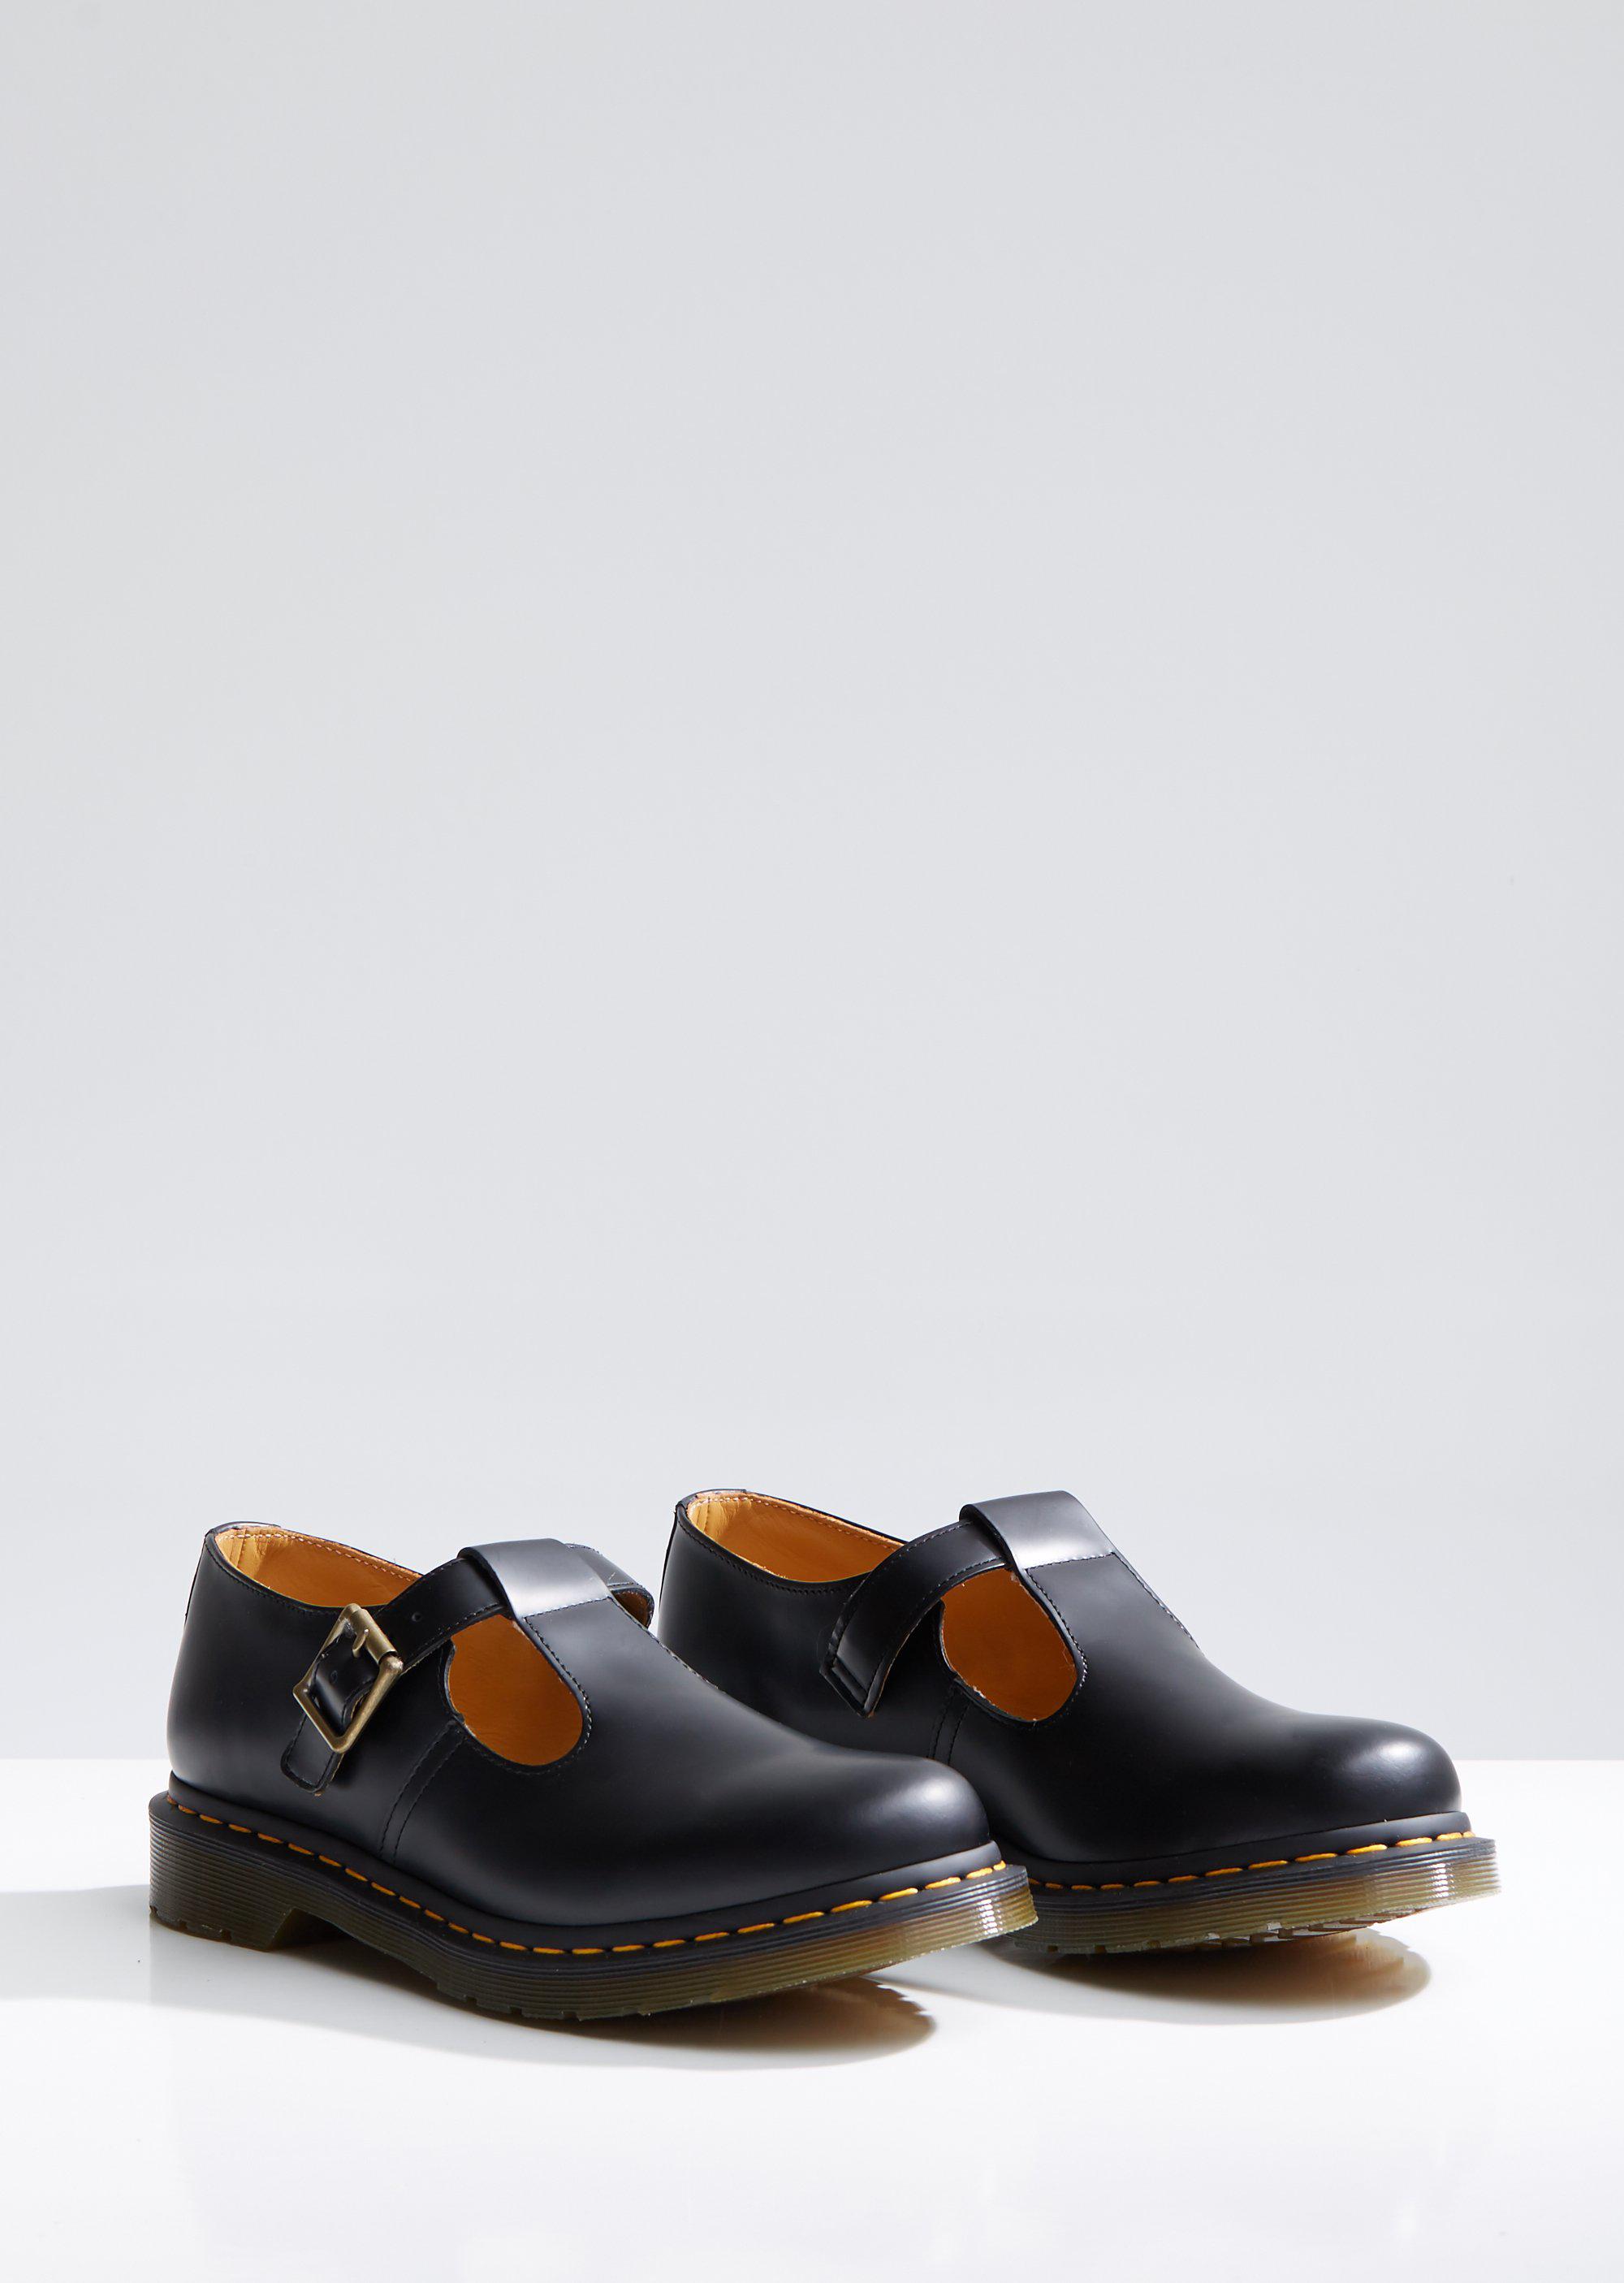 Dr. Martens Polley T Bar Mary Janes in Black | Lyst